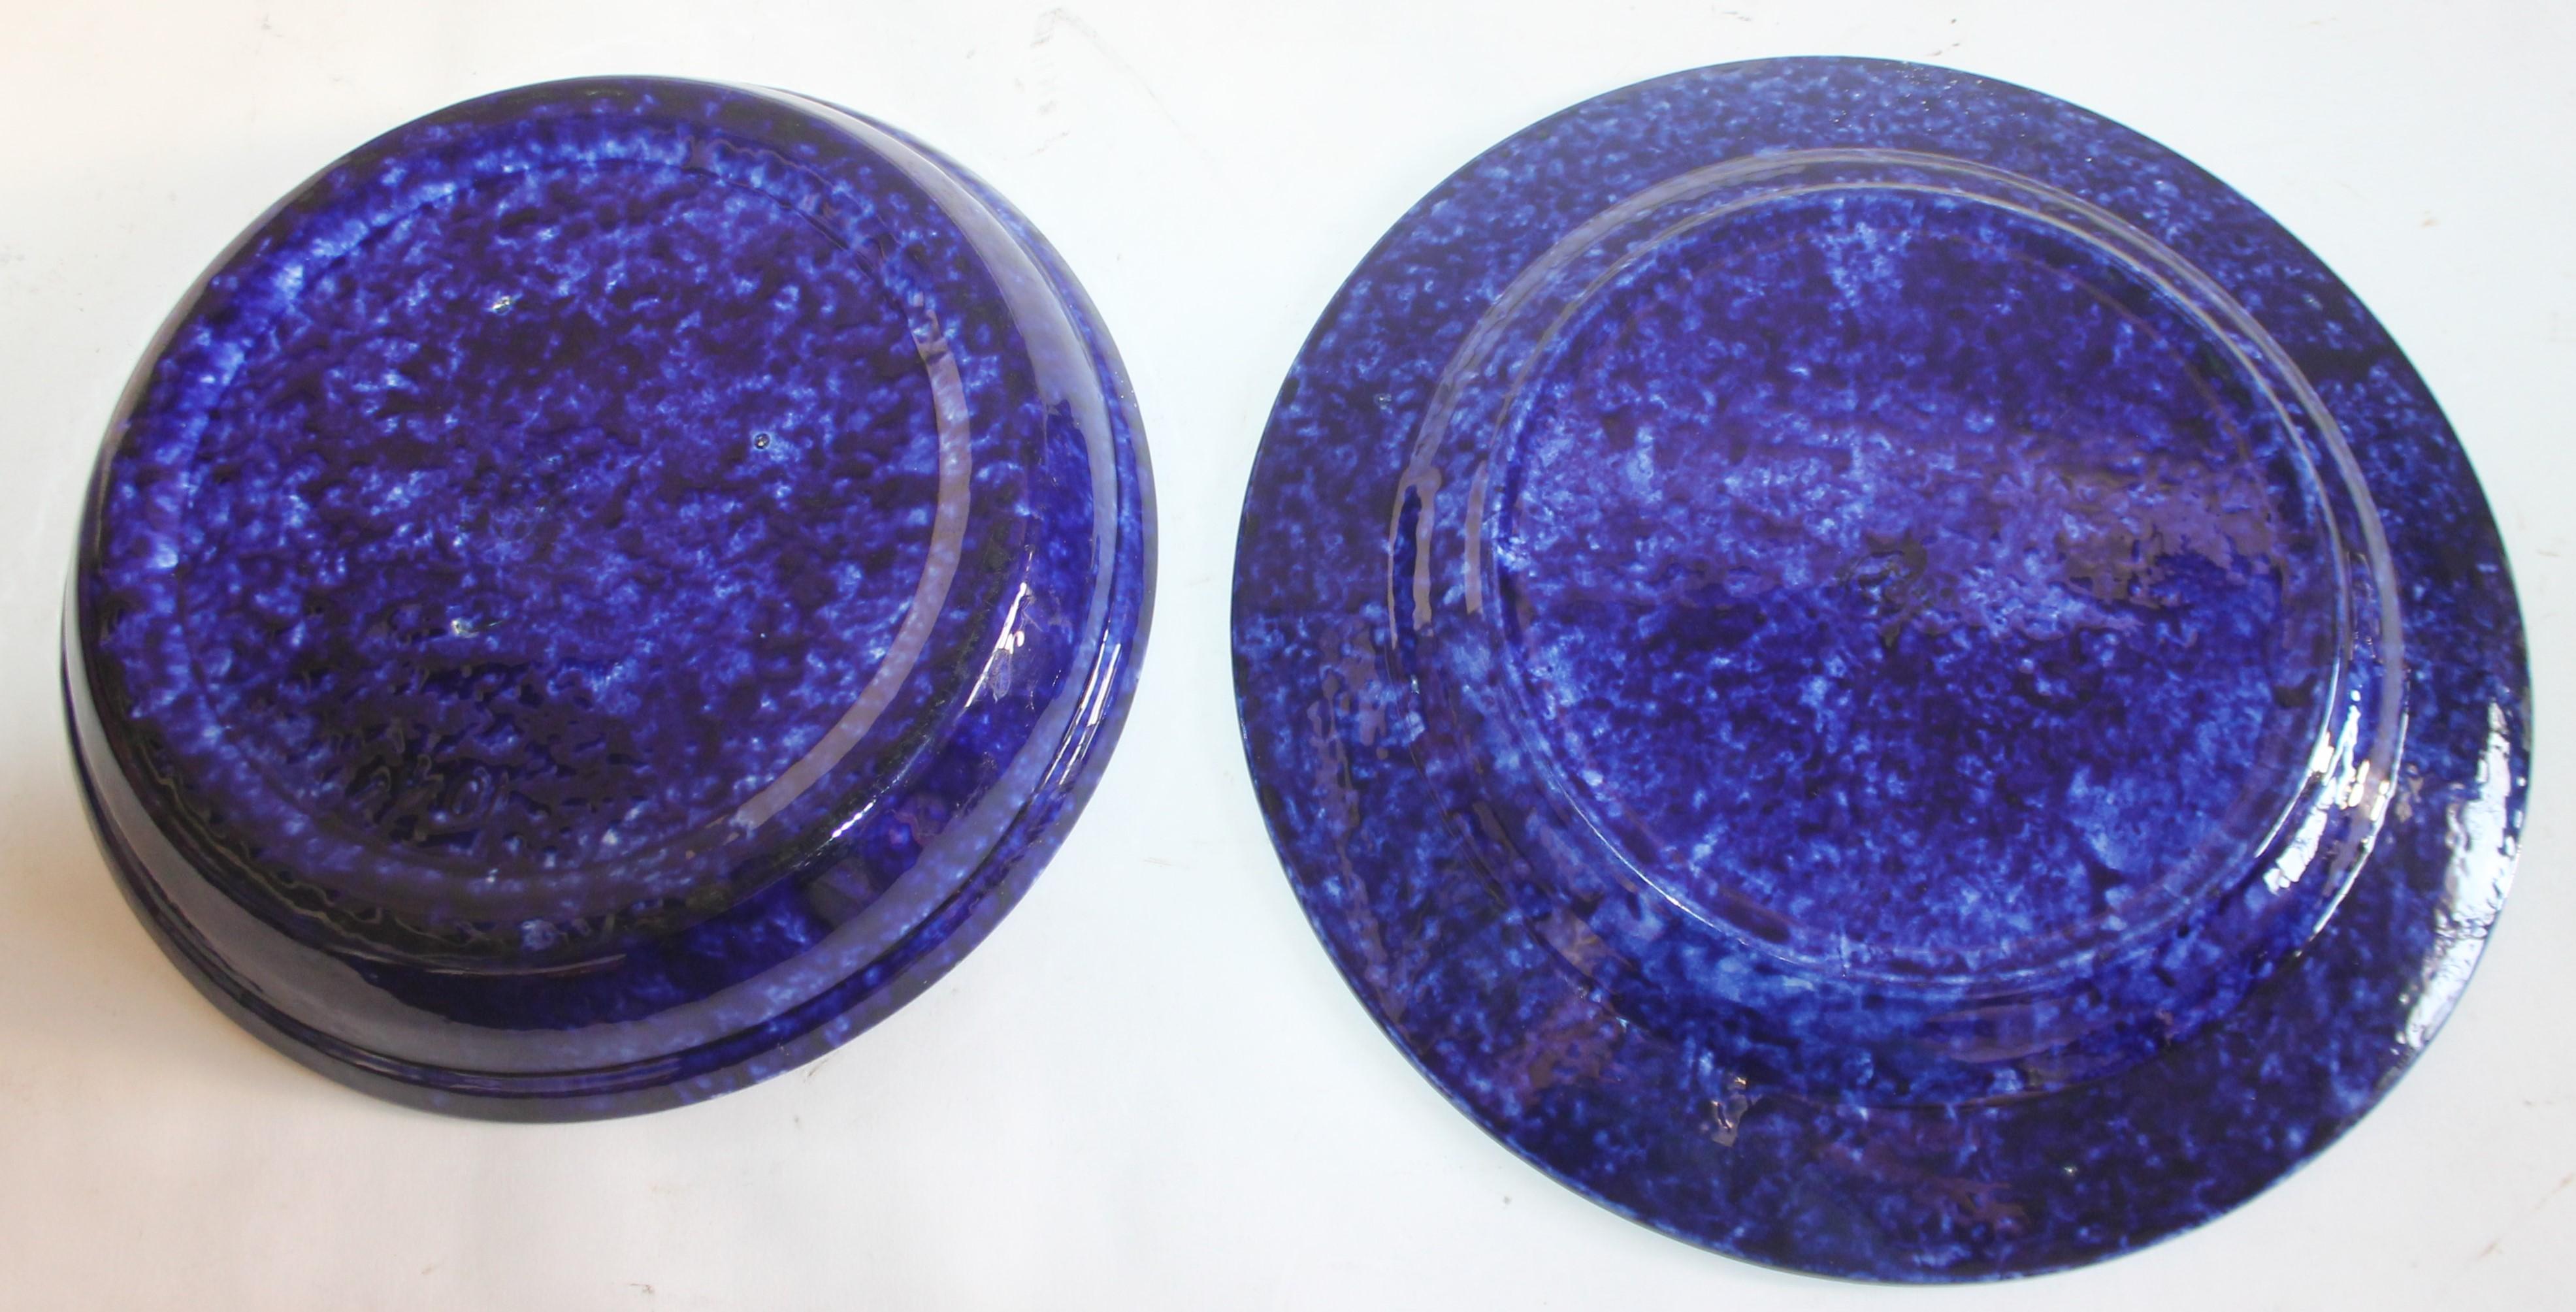 Sponge ware ironstone pottery pie dish and serving plate.The condition is very good and color is fantastic shades of indigo blue. Selling the two pieces as a pair.

Measures: 12.5 x 1 large plate


11 x 2 deep plate.